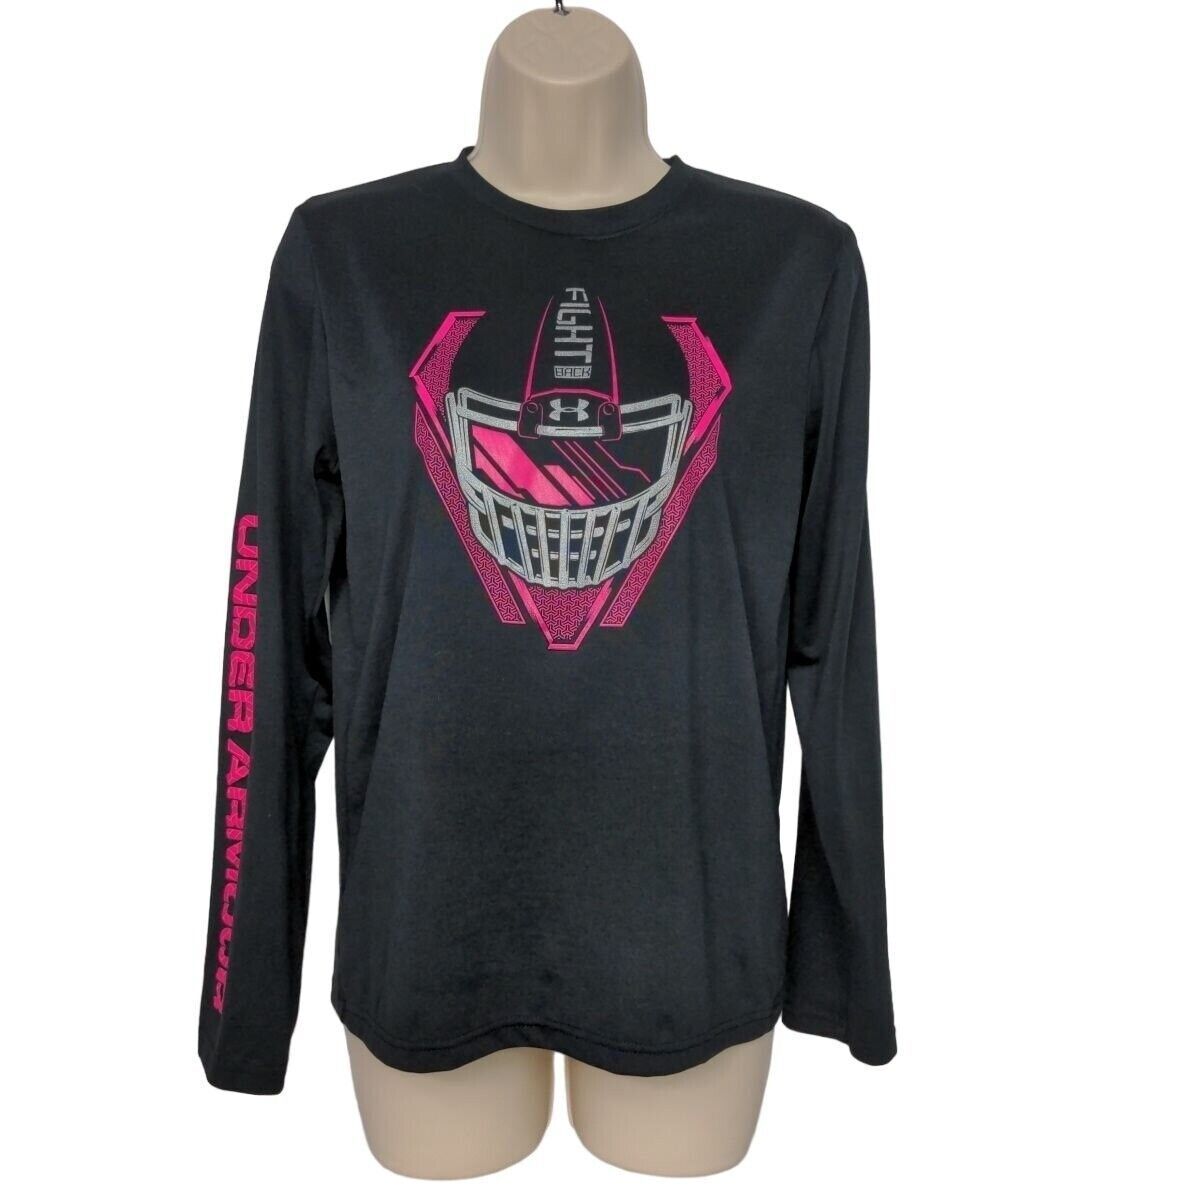 Primary image for Under Armour Youth Heatgear Loose Fit Shirt Size Large Fight Back Black Pink